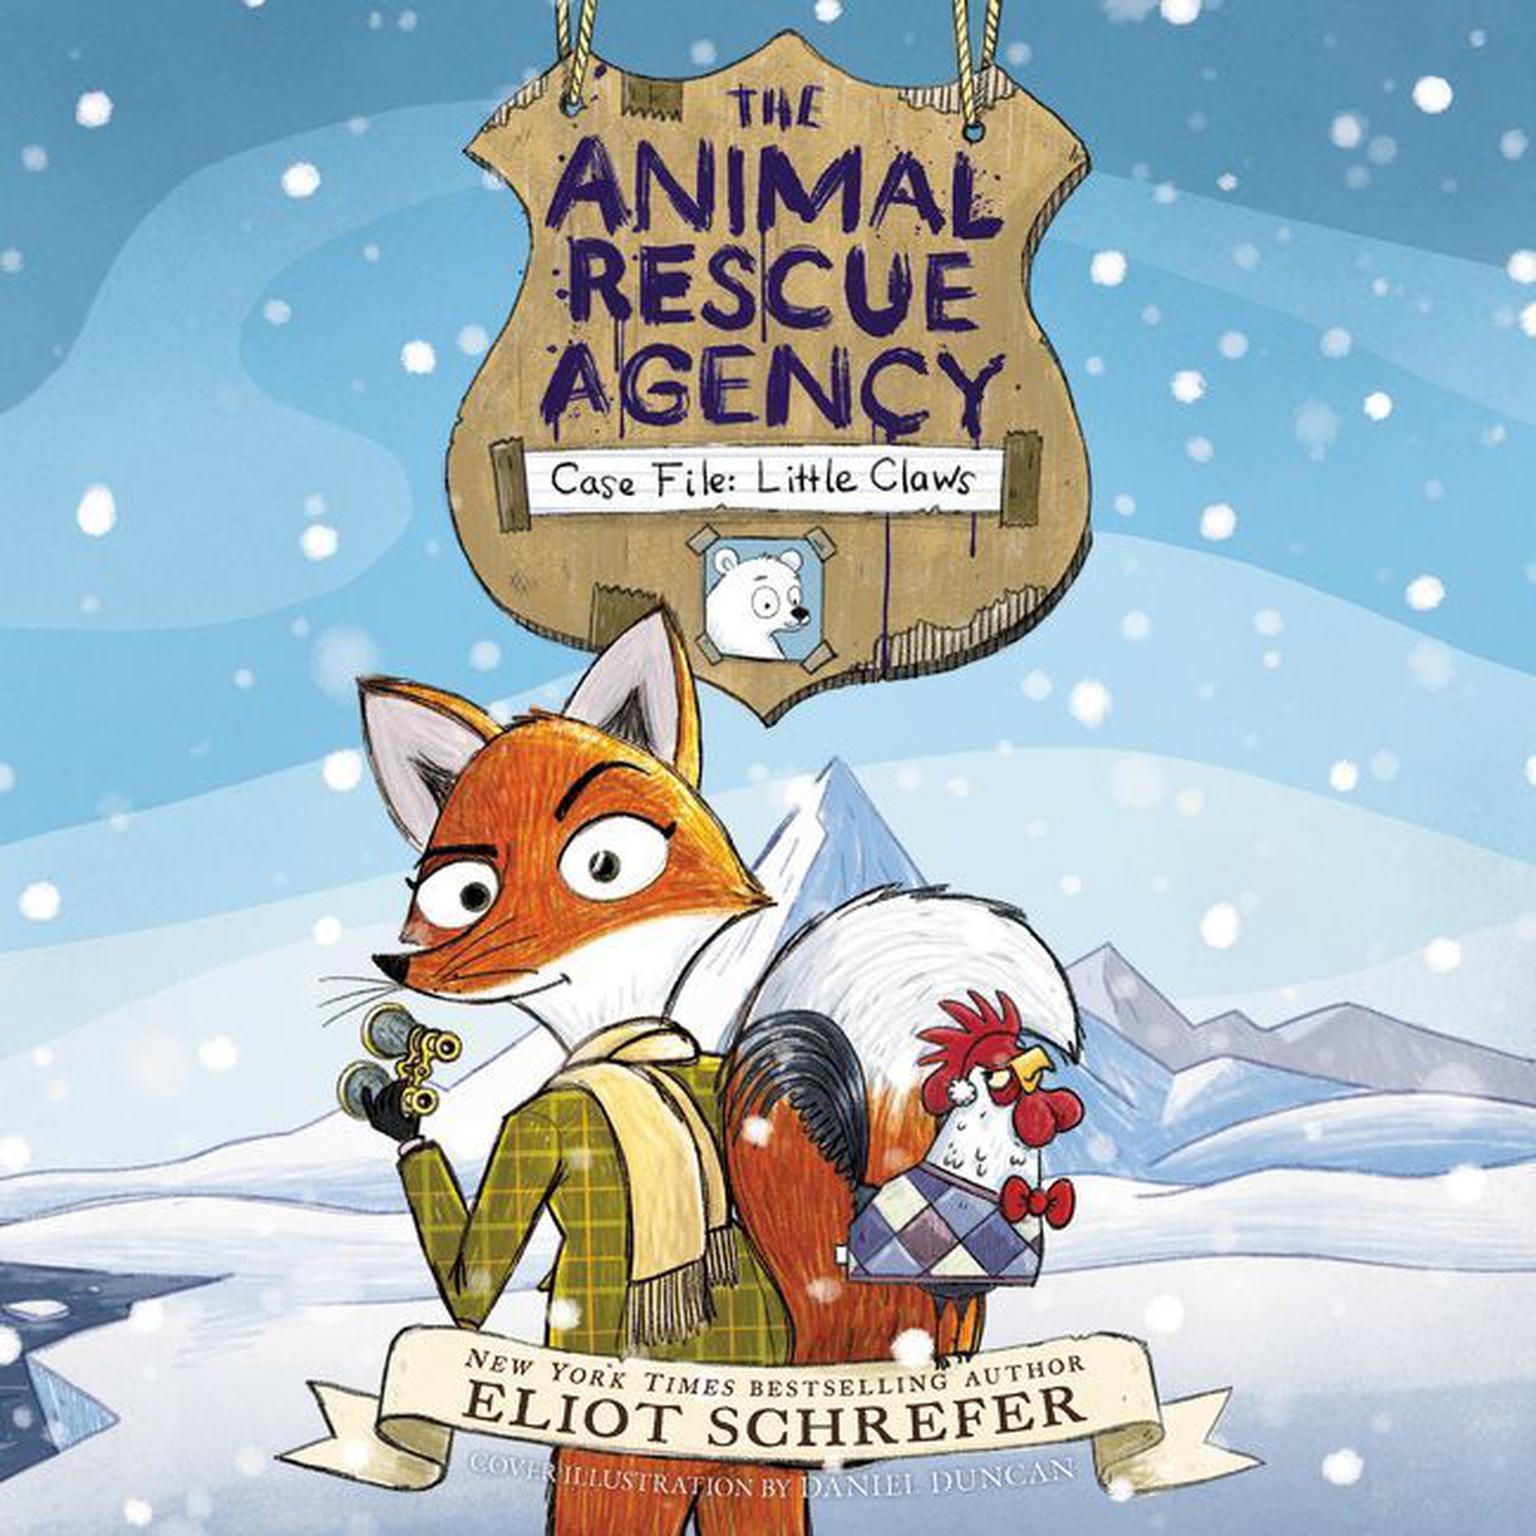 The Animal Rescue Agency #1: Case File: Little Claws Audiobook, by Eliot Schrefer